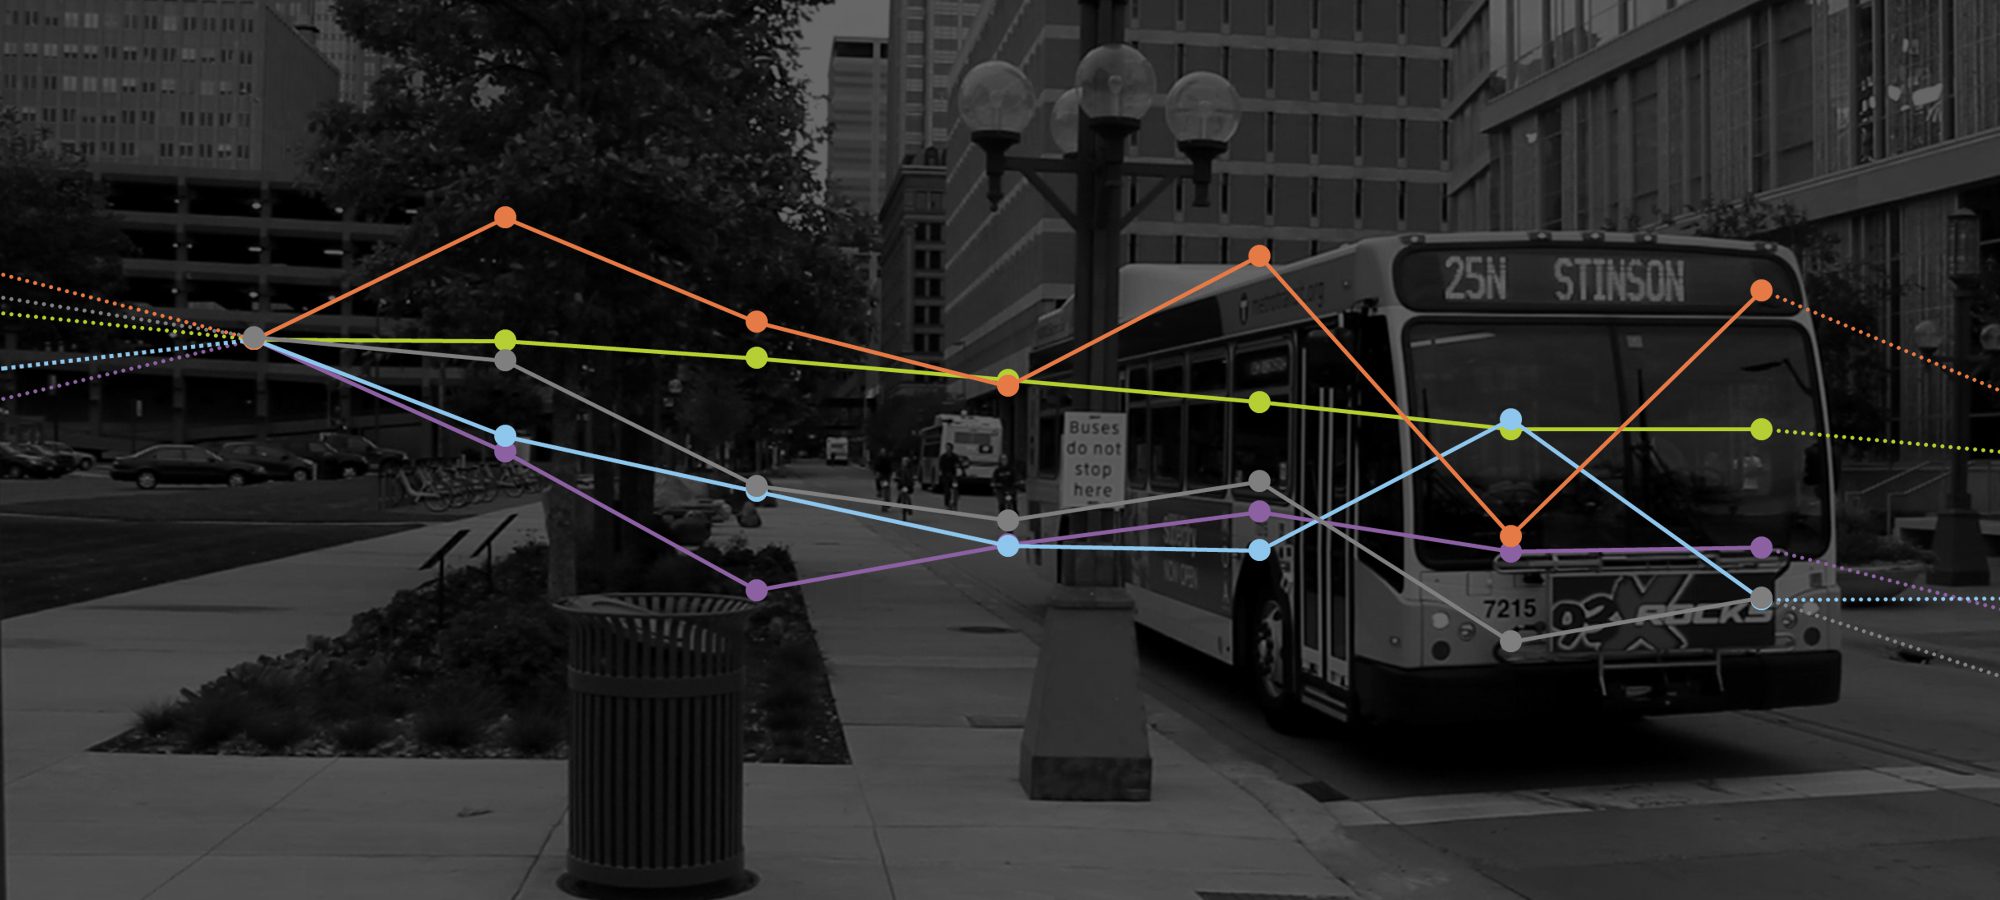 bus on a city street with a line graph overlaid